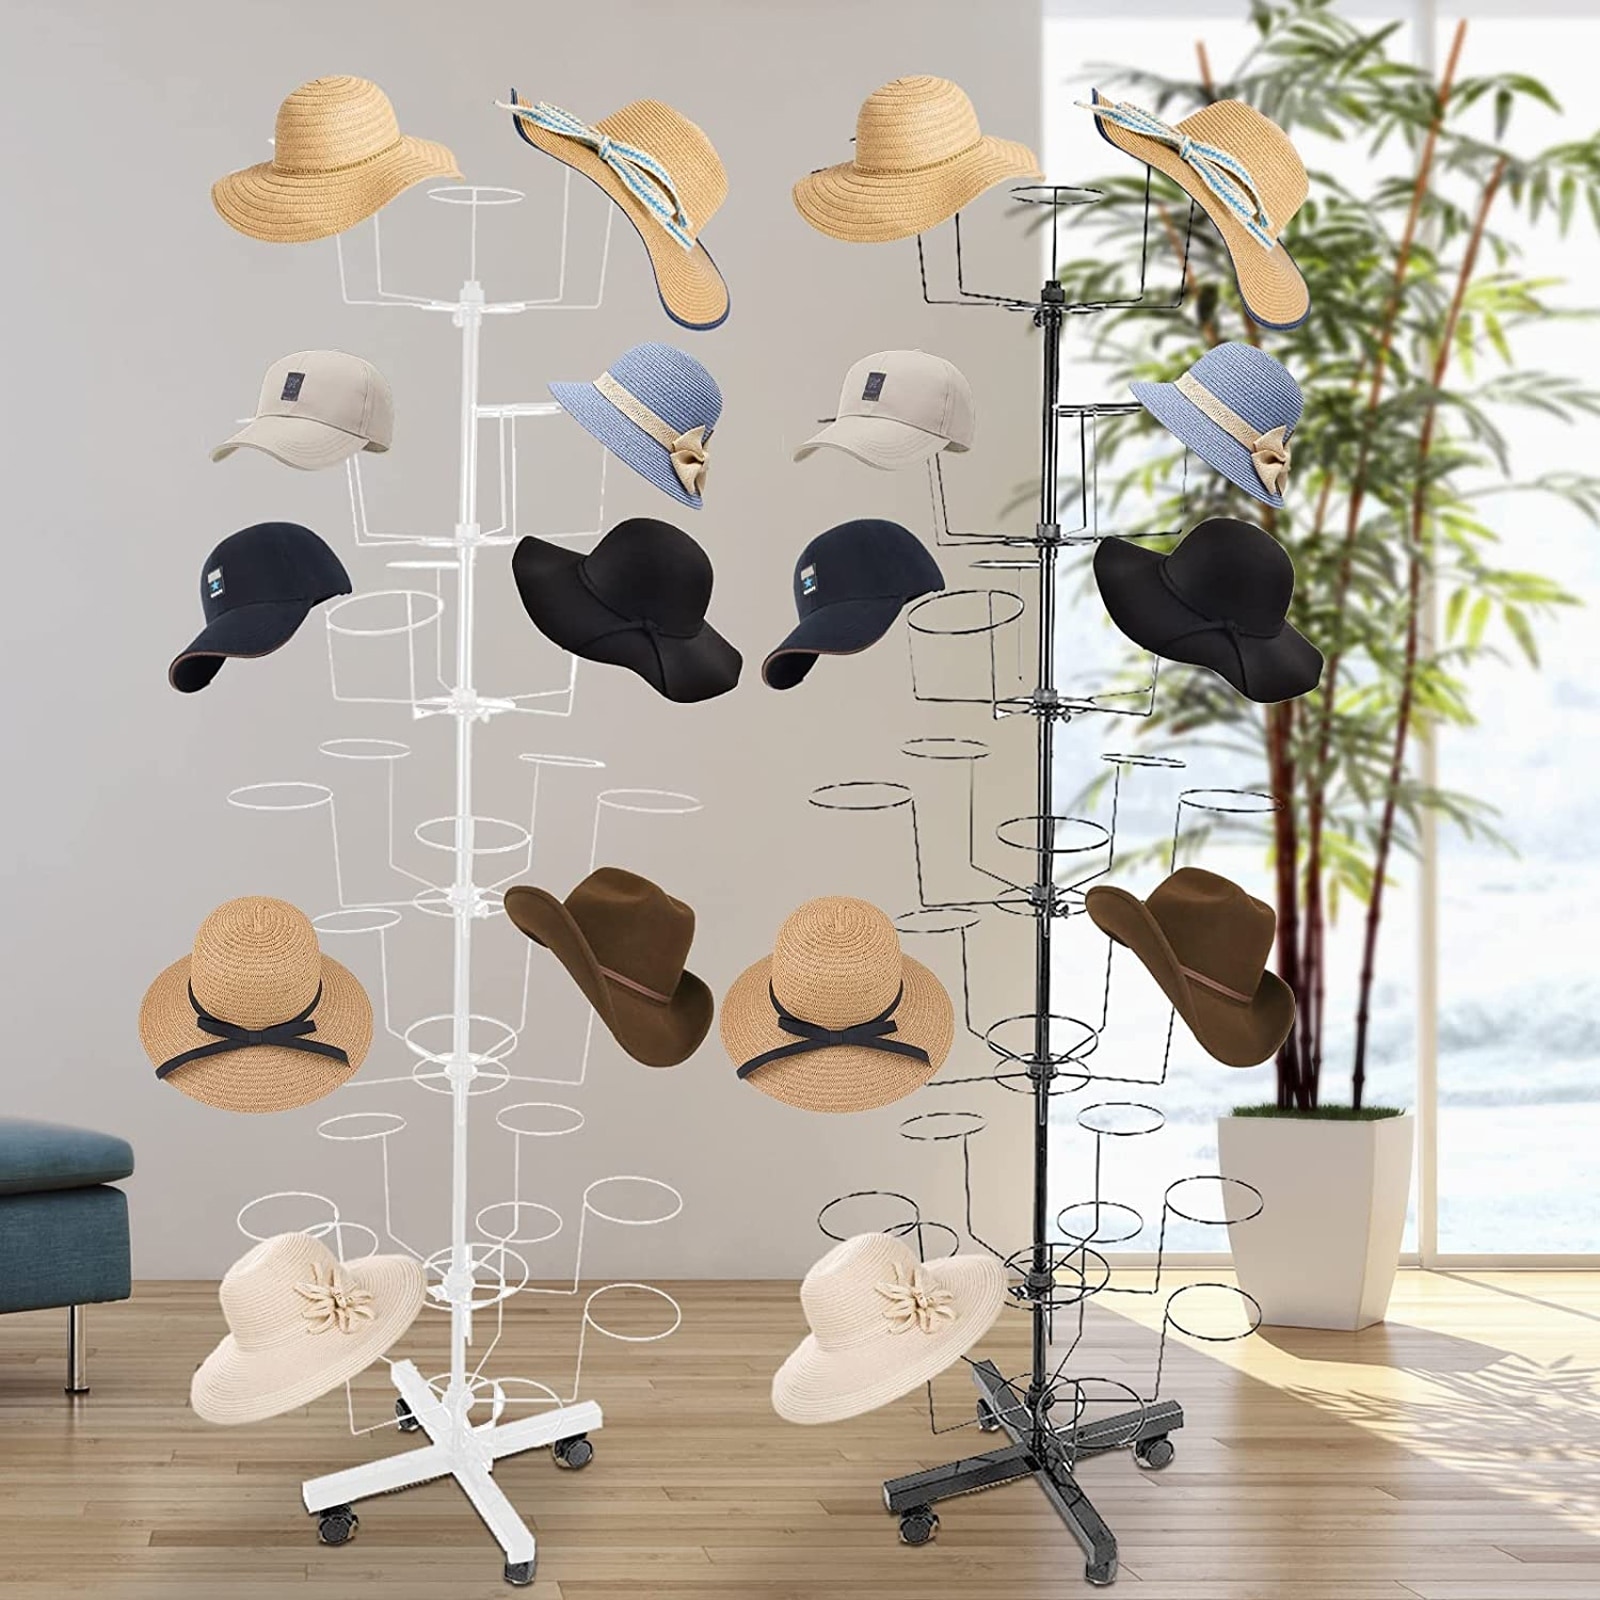 https://ak1.ostkcdn.com/images/products/is/images/direct/afb6908268cf287875956edb6680900f0cc21f68/7-Tier-Freestanding-Cap-Display-Hat-Rack-Stand-with-35-Hooks.jpg